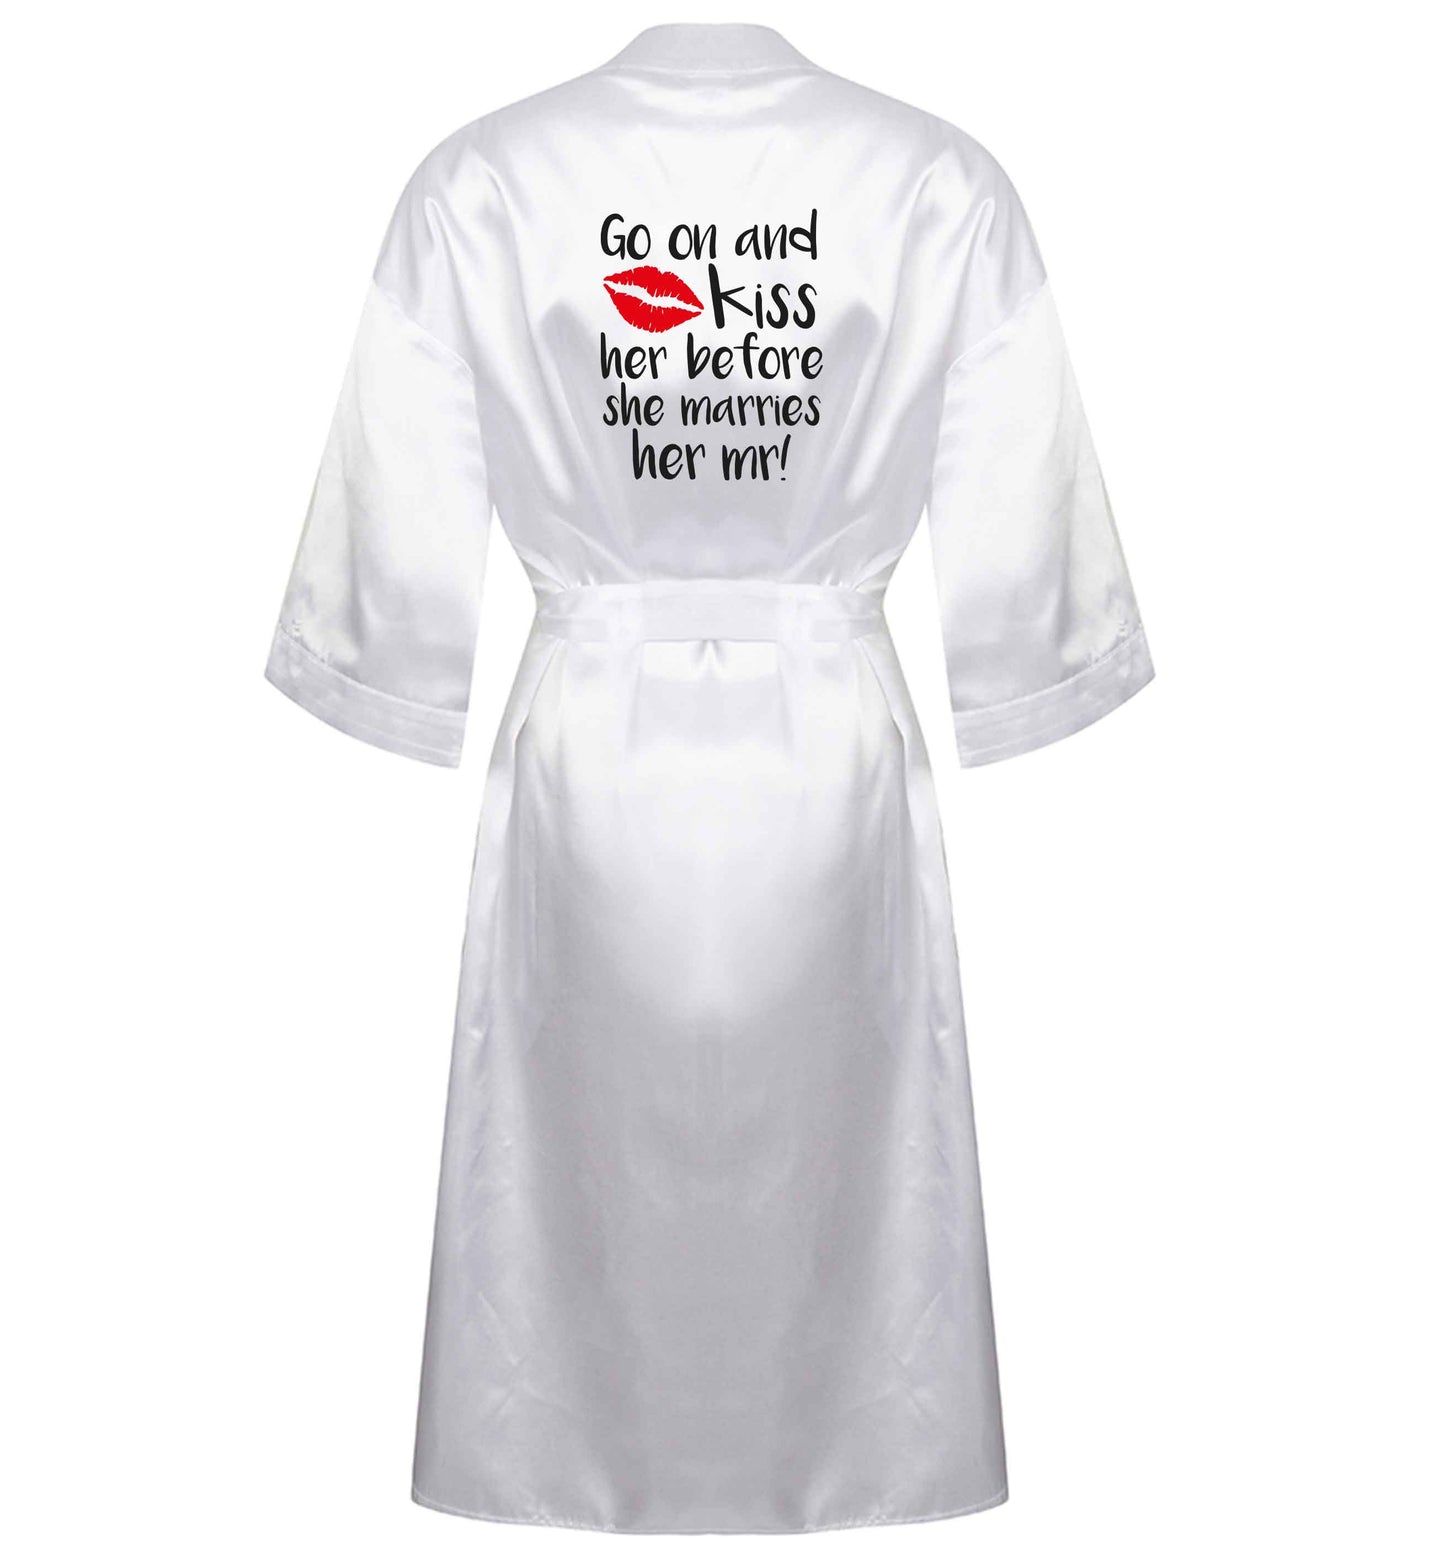 Kiss her before she marries her mr! XL/XXL white ladies dressing gown size 16/18